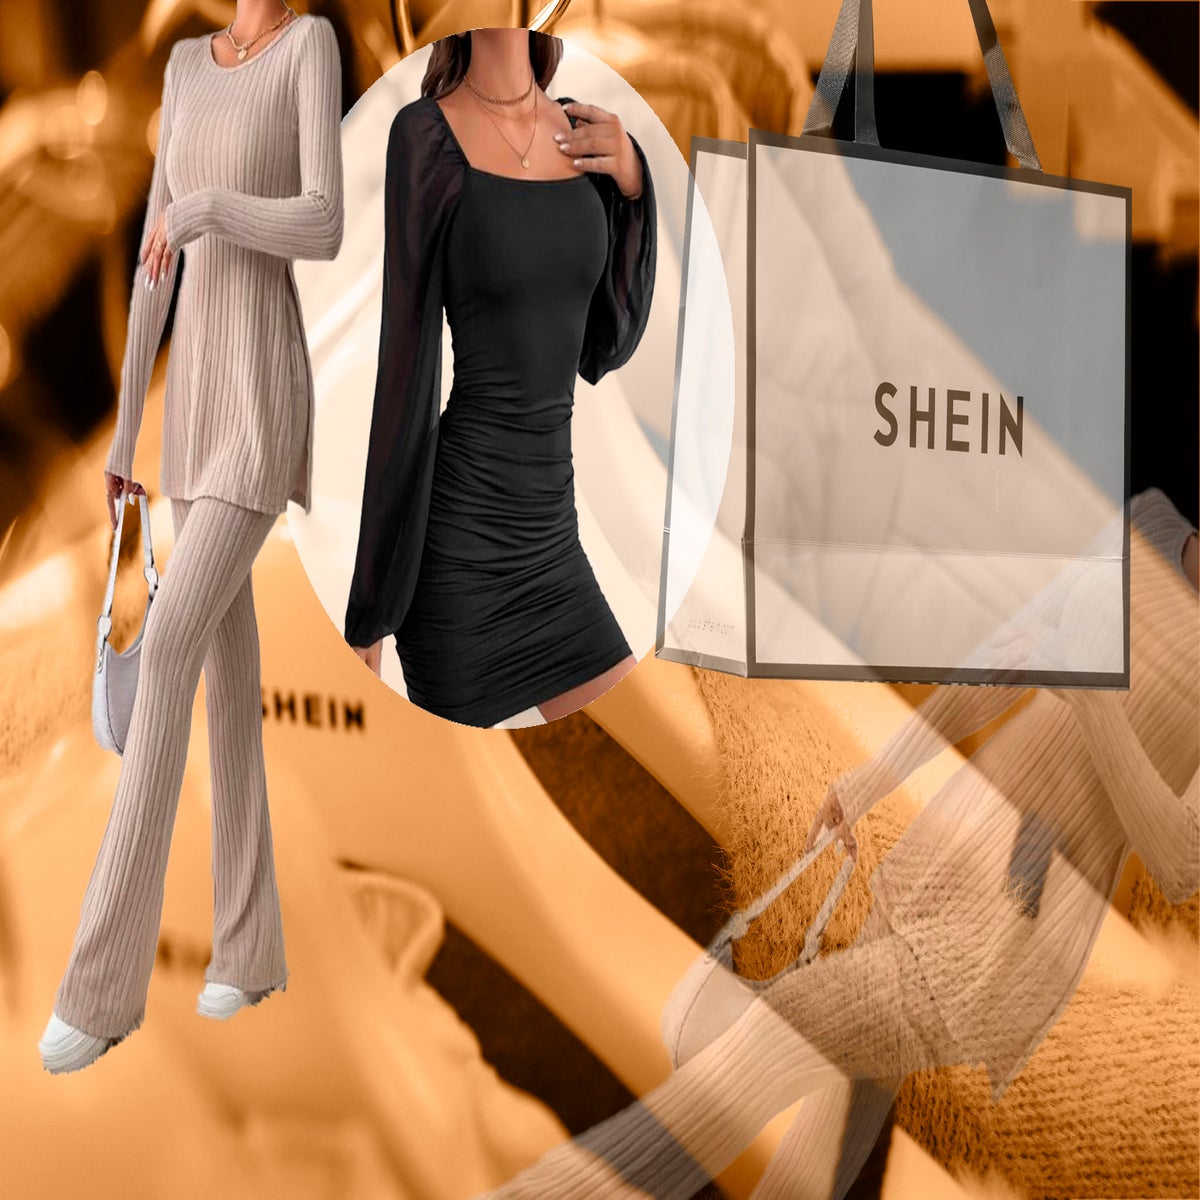 Dresses, Holiday & Going out Dresses, SHEIN UK